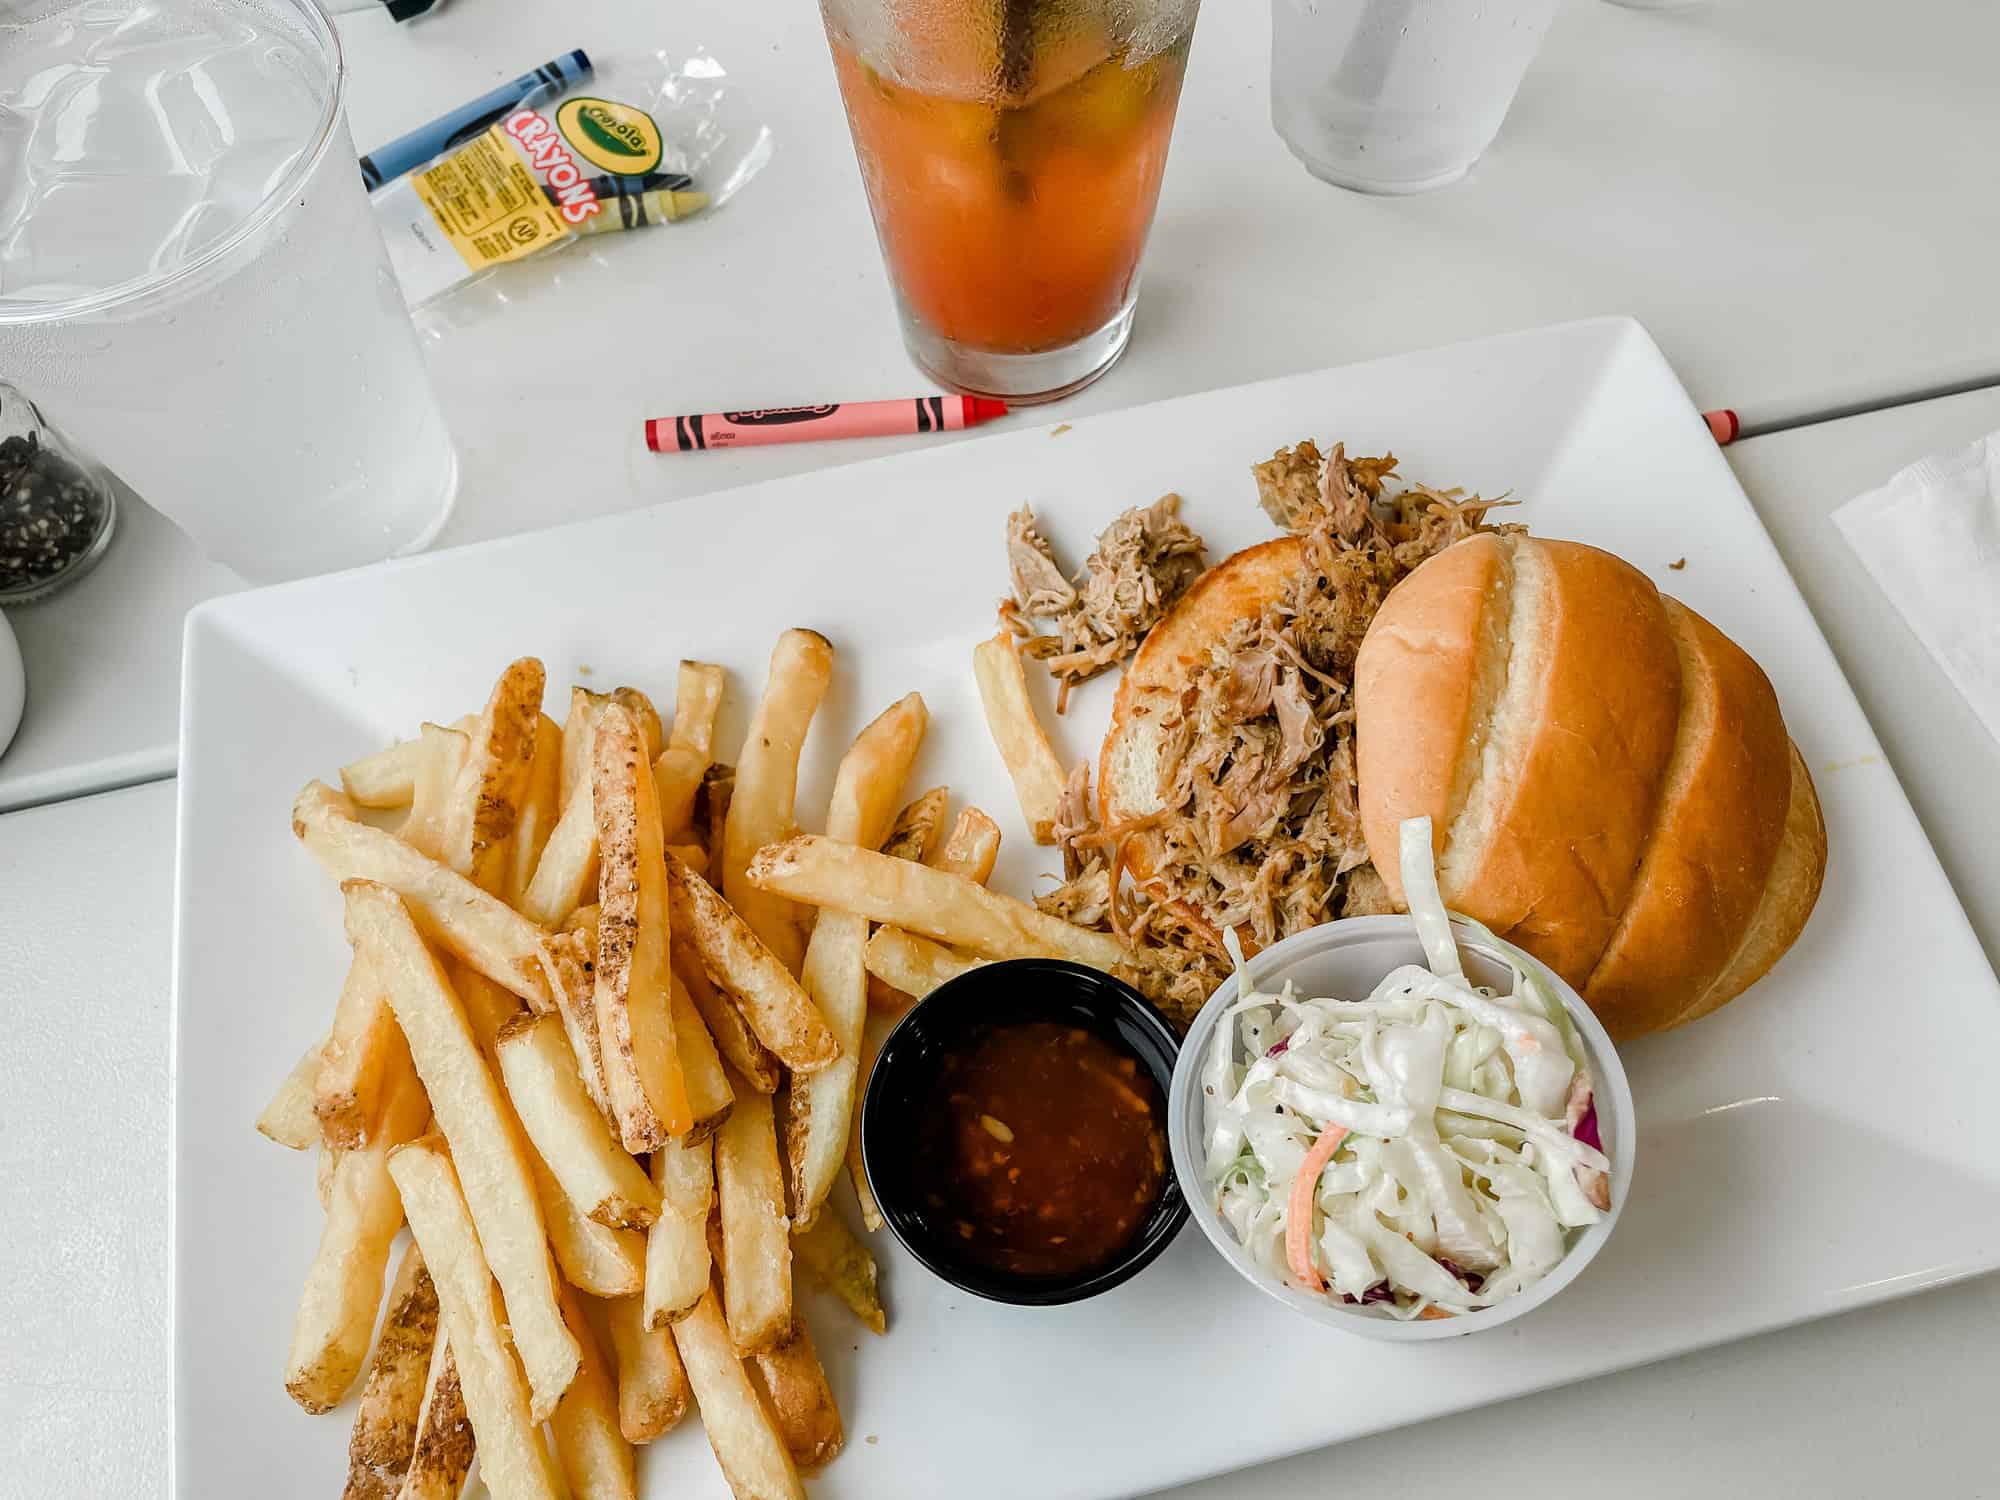 fries, coleslaw, and a pulled pork sandwich on a white plate